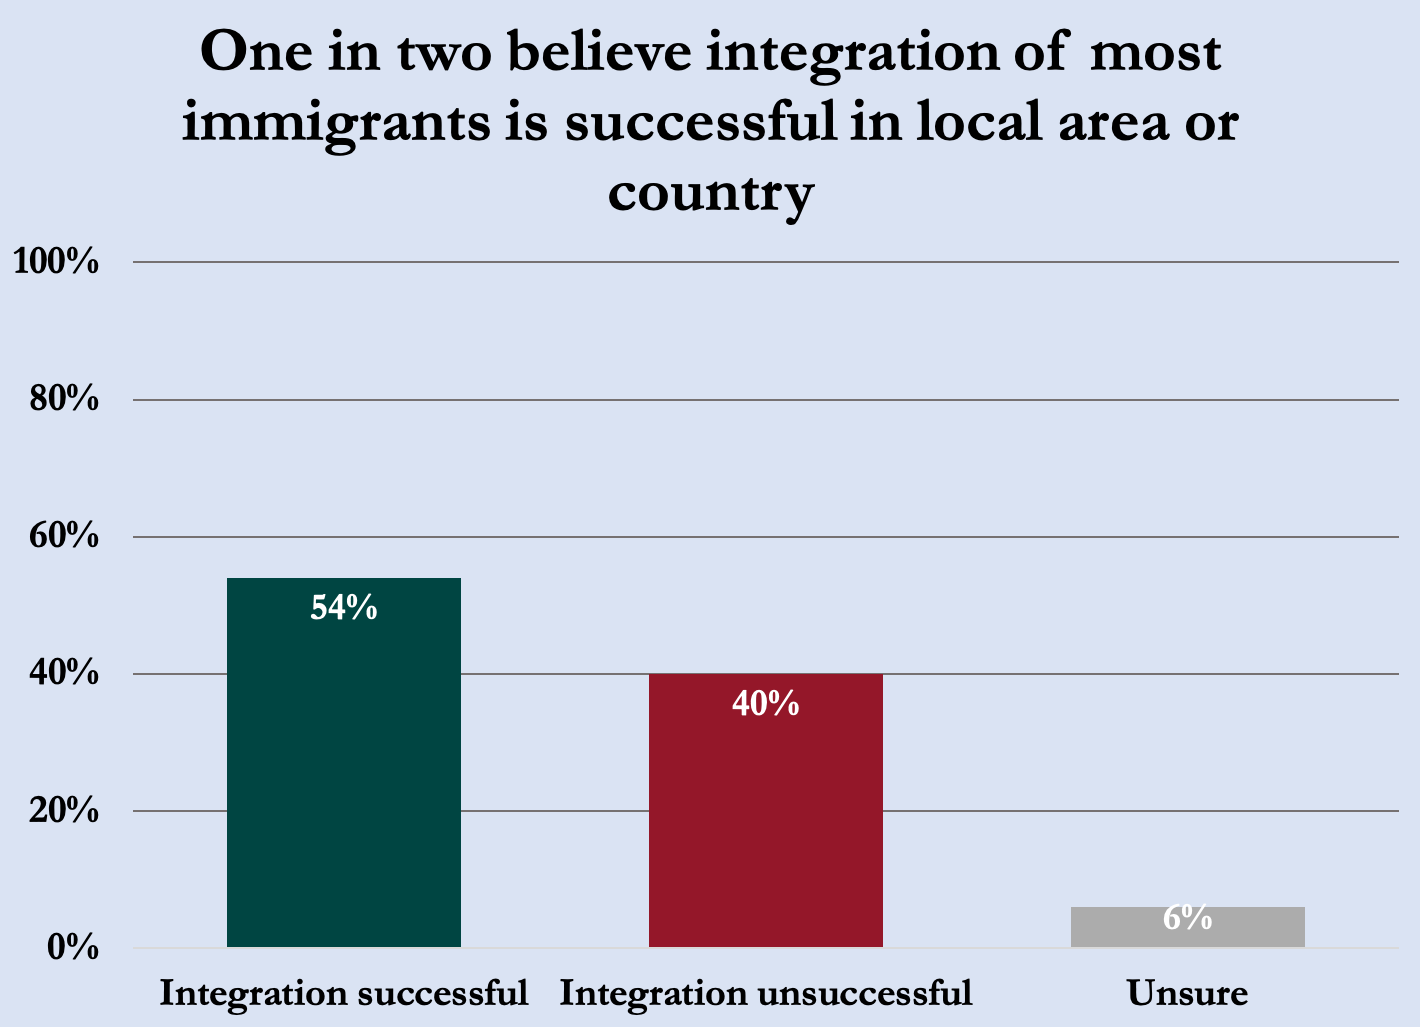 Perceived success of immigrant integration